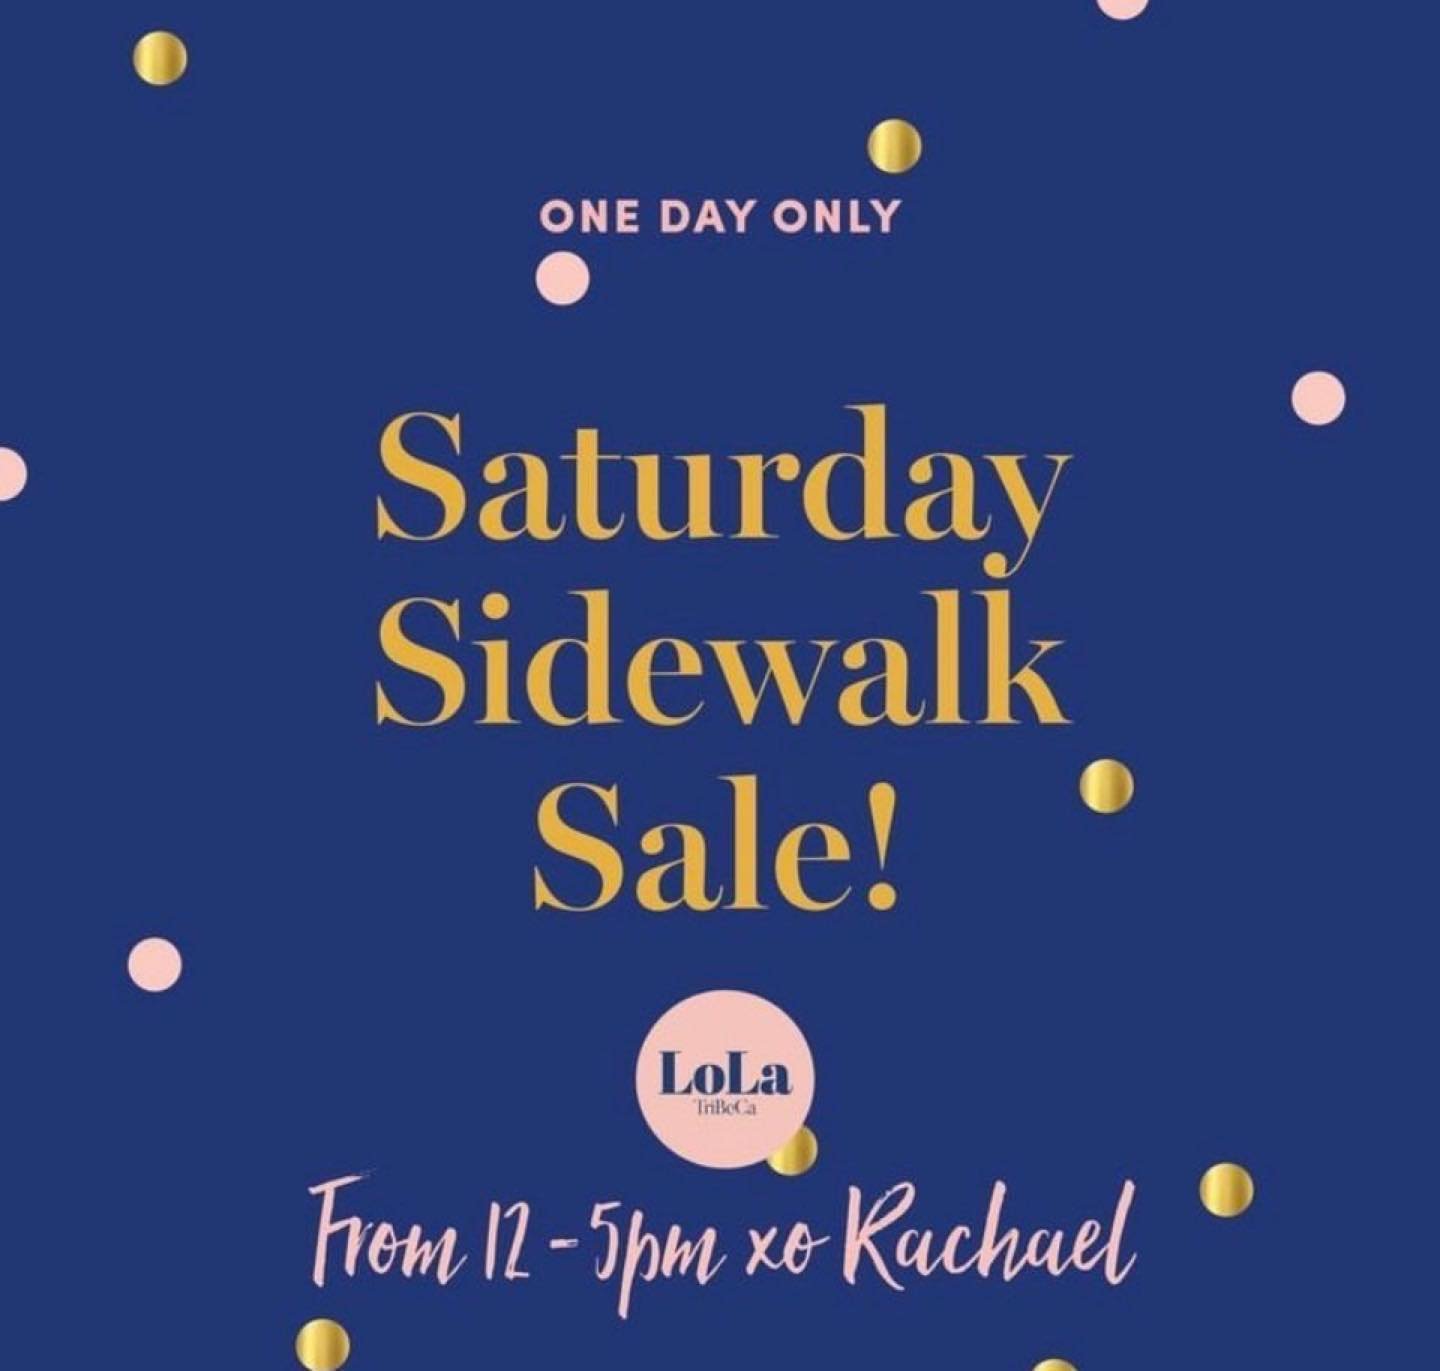 Can&rsquo;t wait to see you tomorrow. Along with Lola Sidewalk sale l have a beautiful young designer selling all her handmade jewelry. xo Rachael